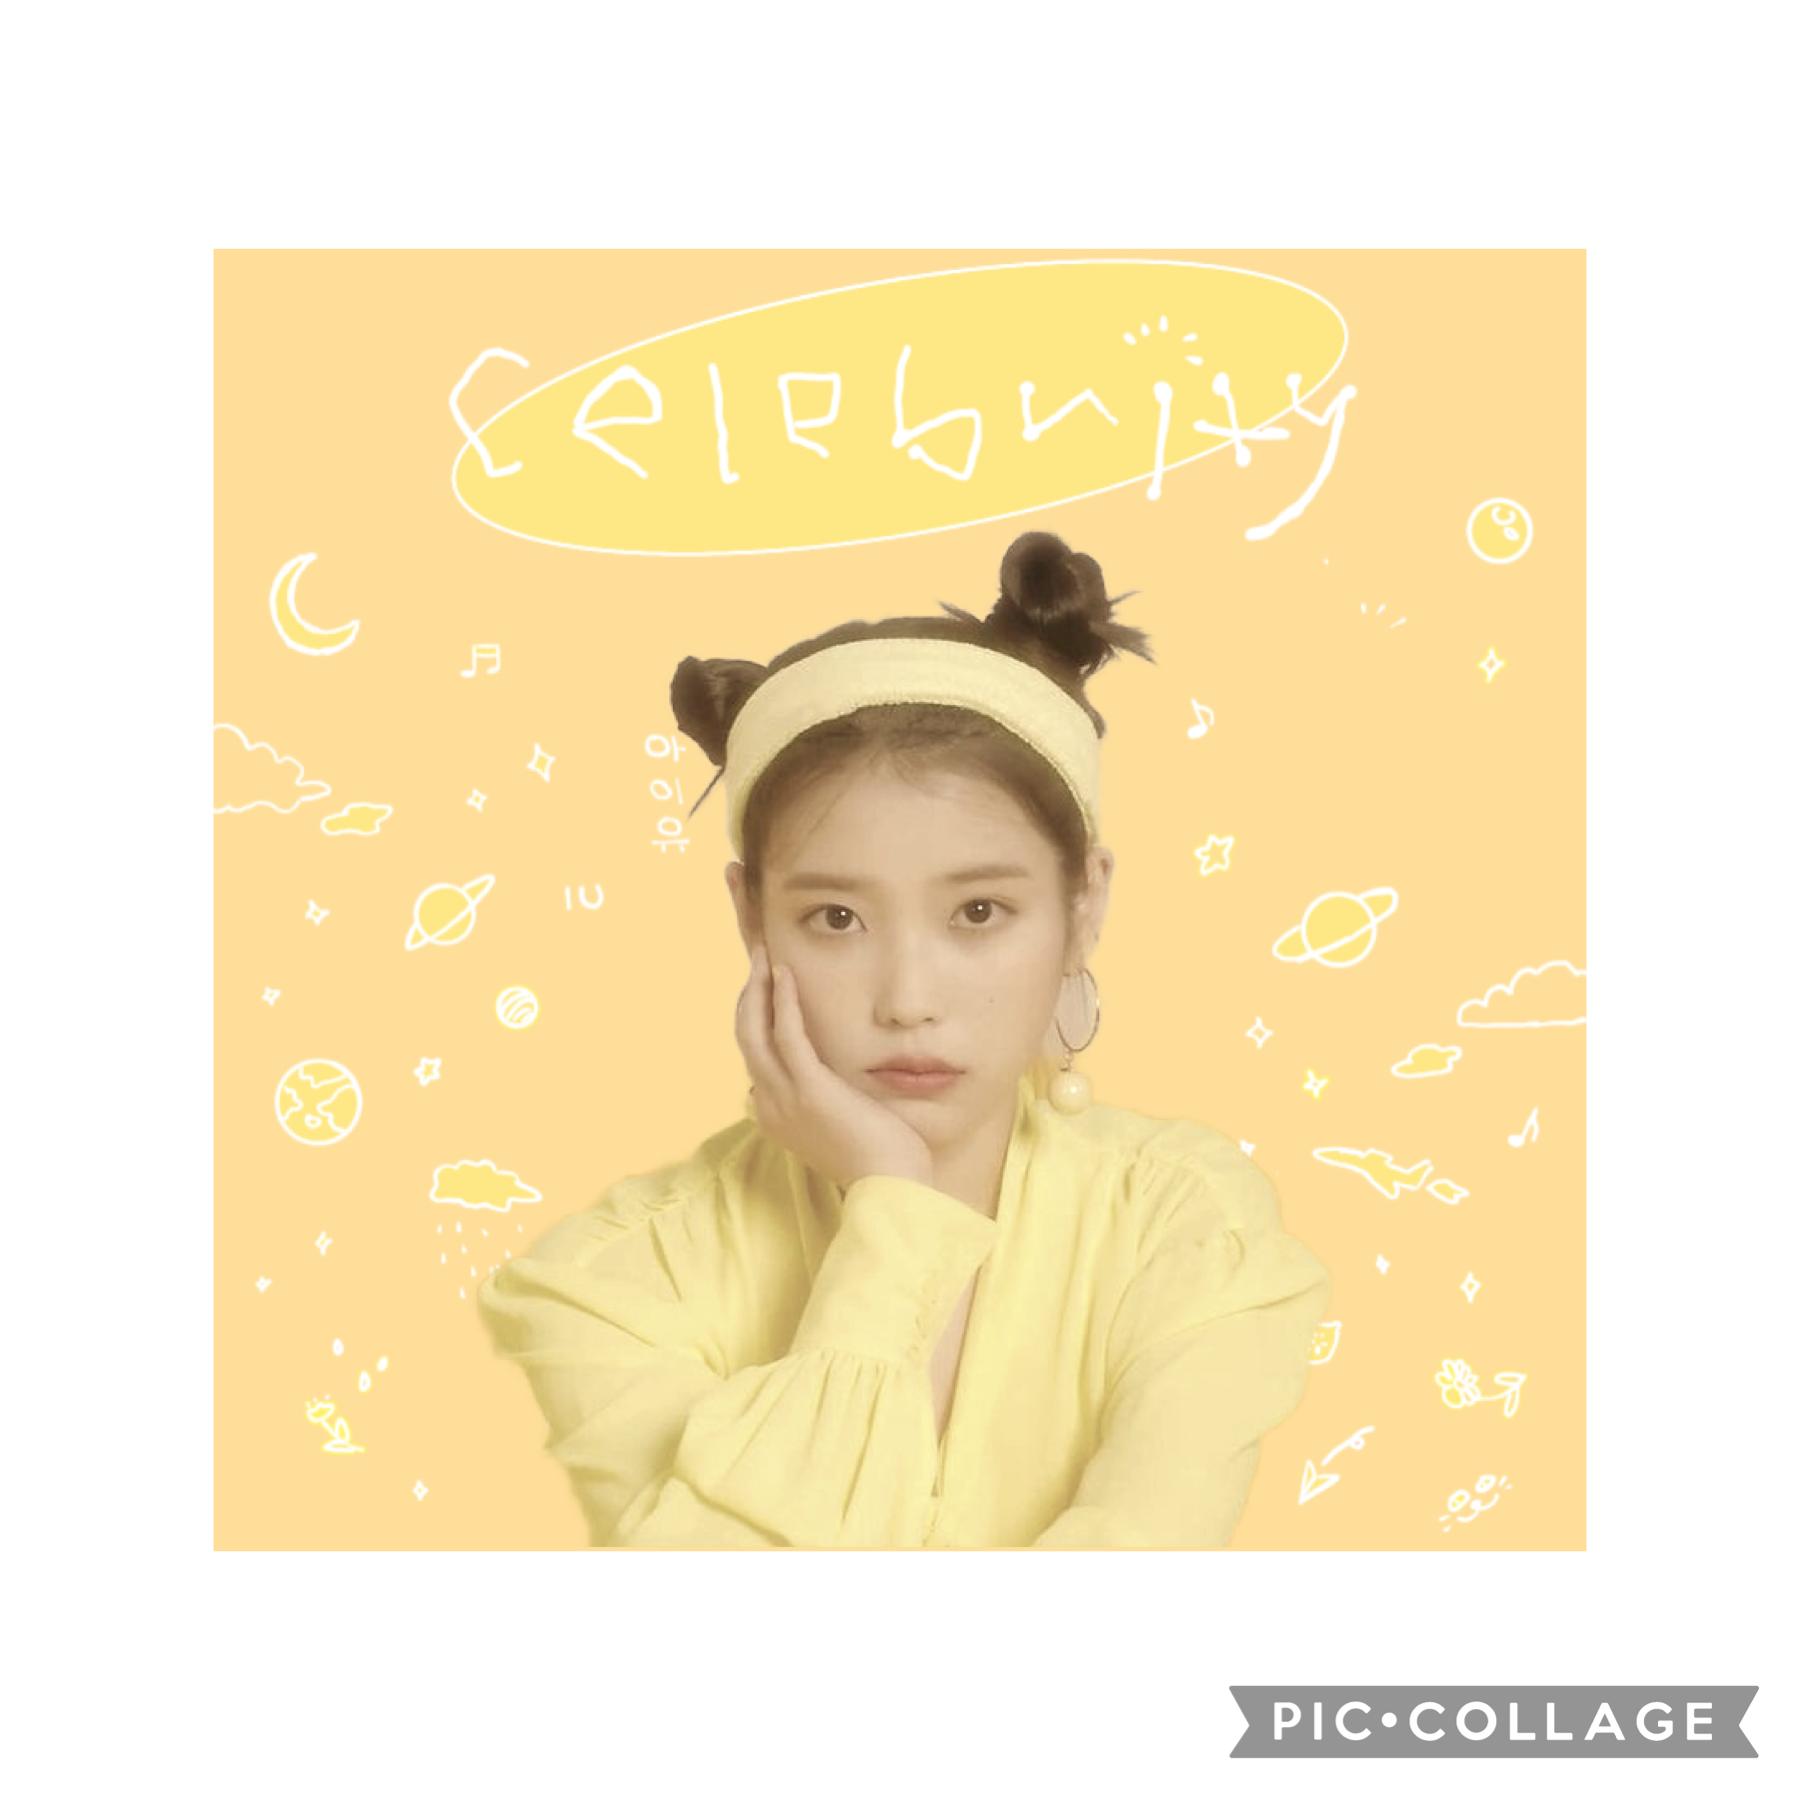 welcome to iu's cafe, open up 🍵 

OK I RECREATED HER ALBUM COVER AND IT TURNED OUT SO PRETTY PLS I LOVE IT IM GOING TO MAKE A SERIES OF THIS

song of the day: celebrity by iu